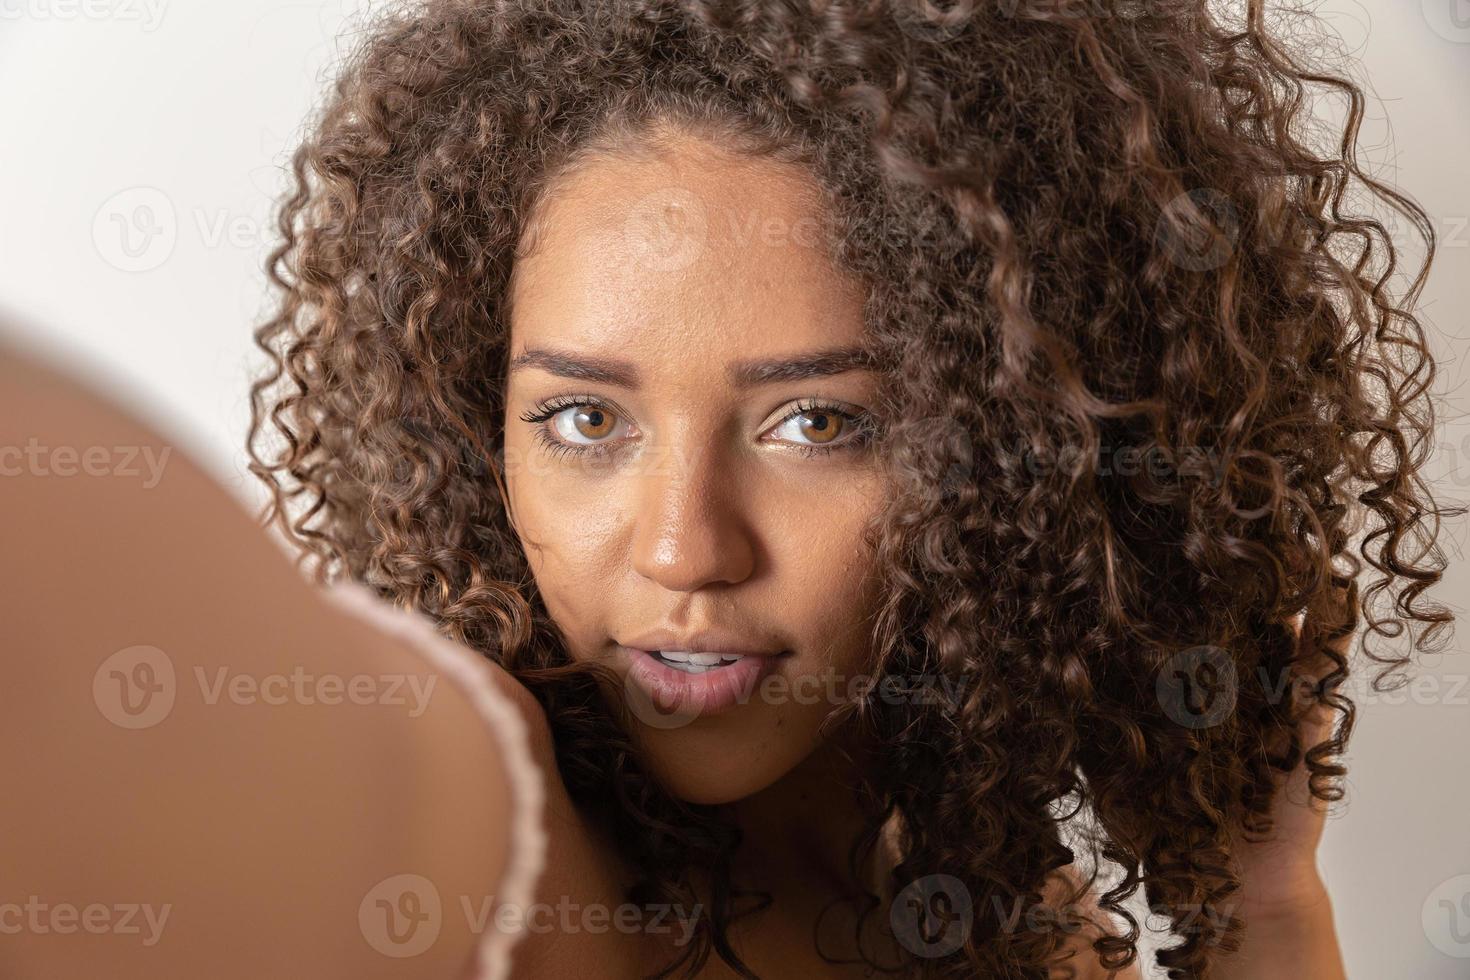 Selfie portrait of cheerful black woman in studio with curly hair photo